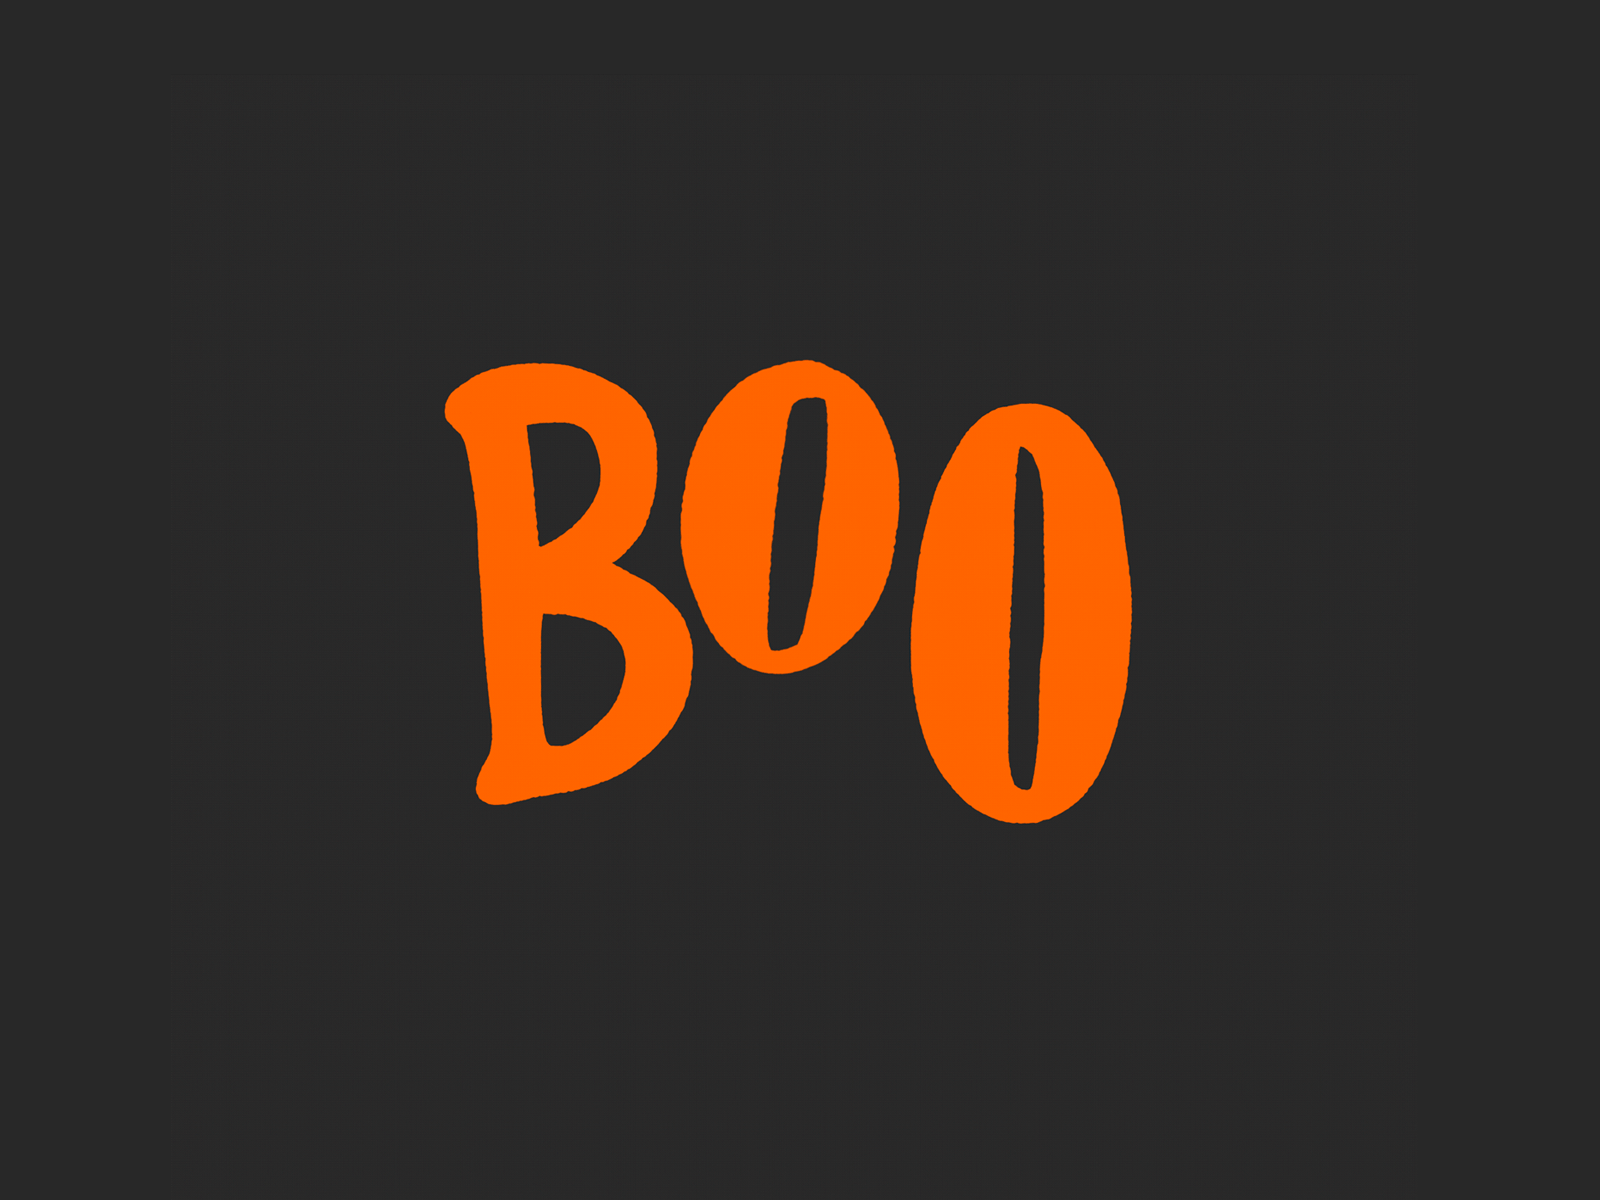 BOO! animated gif animations ghost halloween halloween party illustration scary scary movie spooky spooky season typography